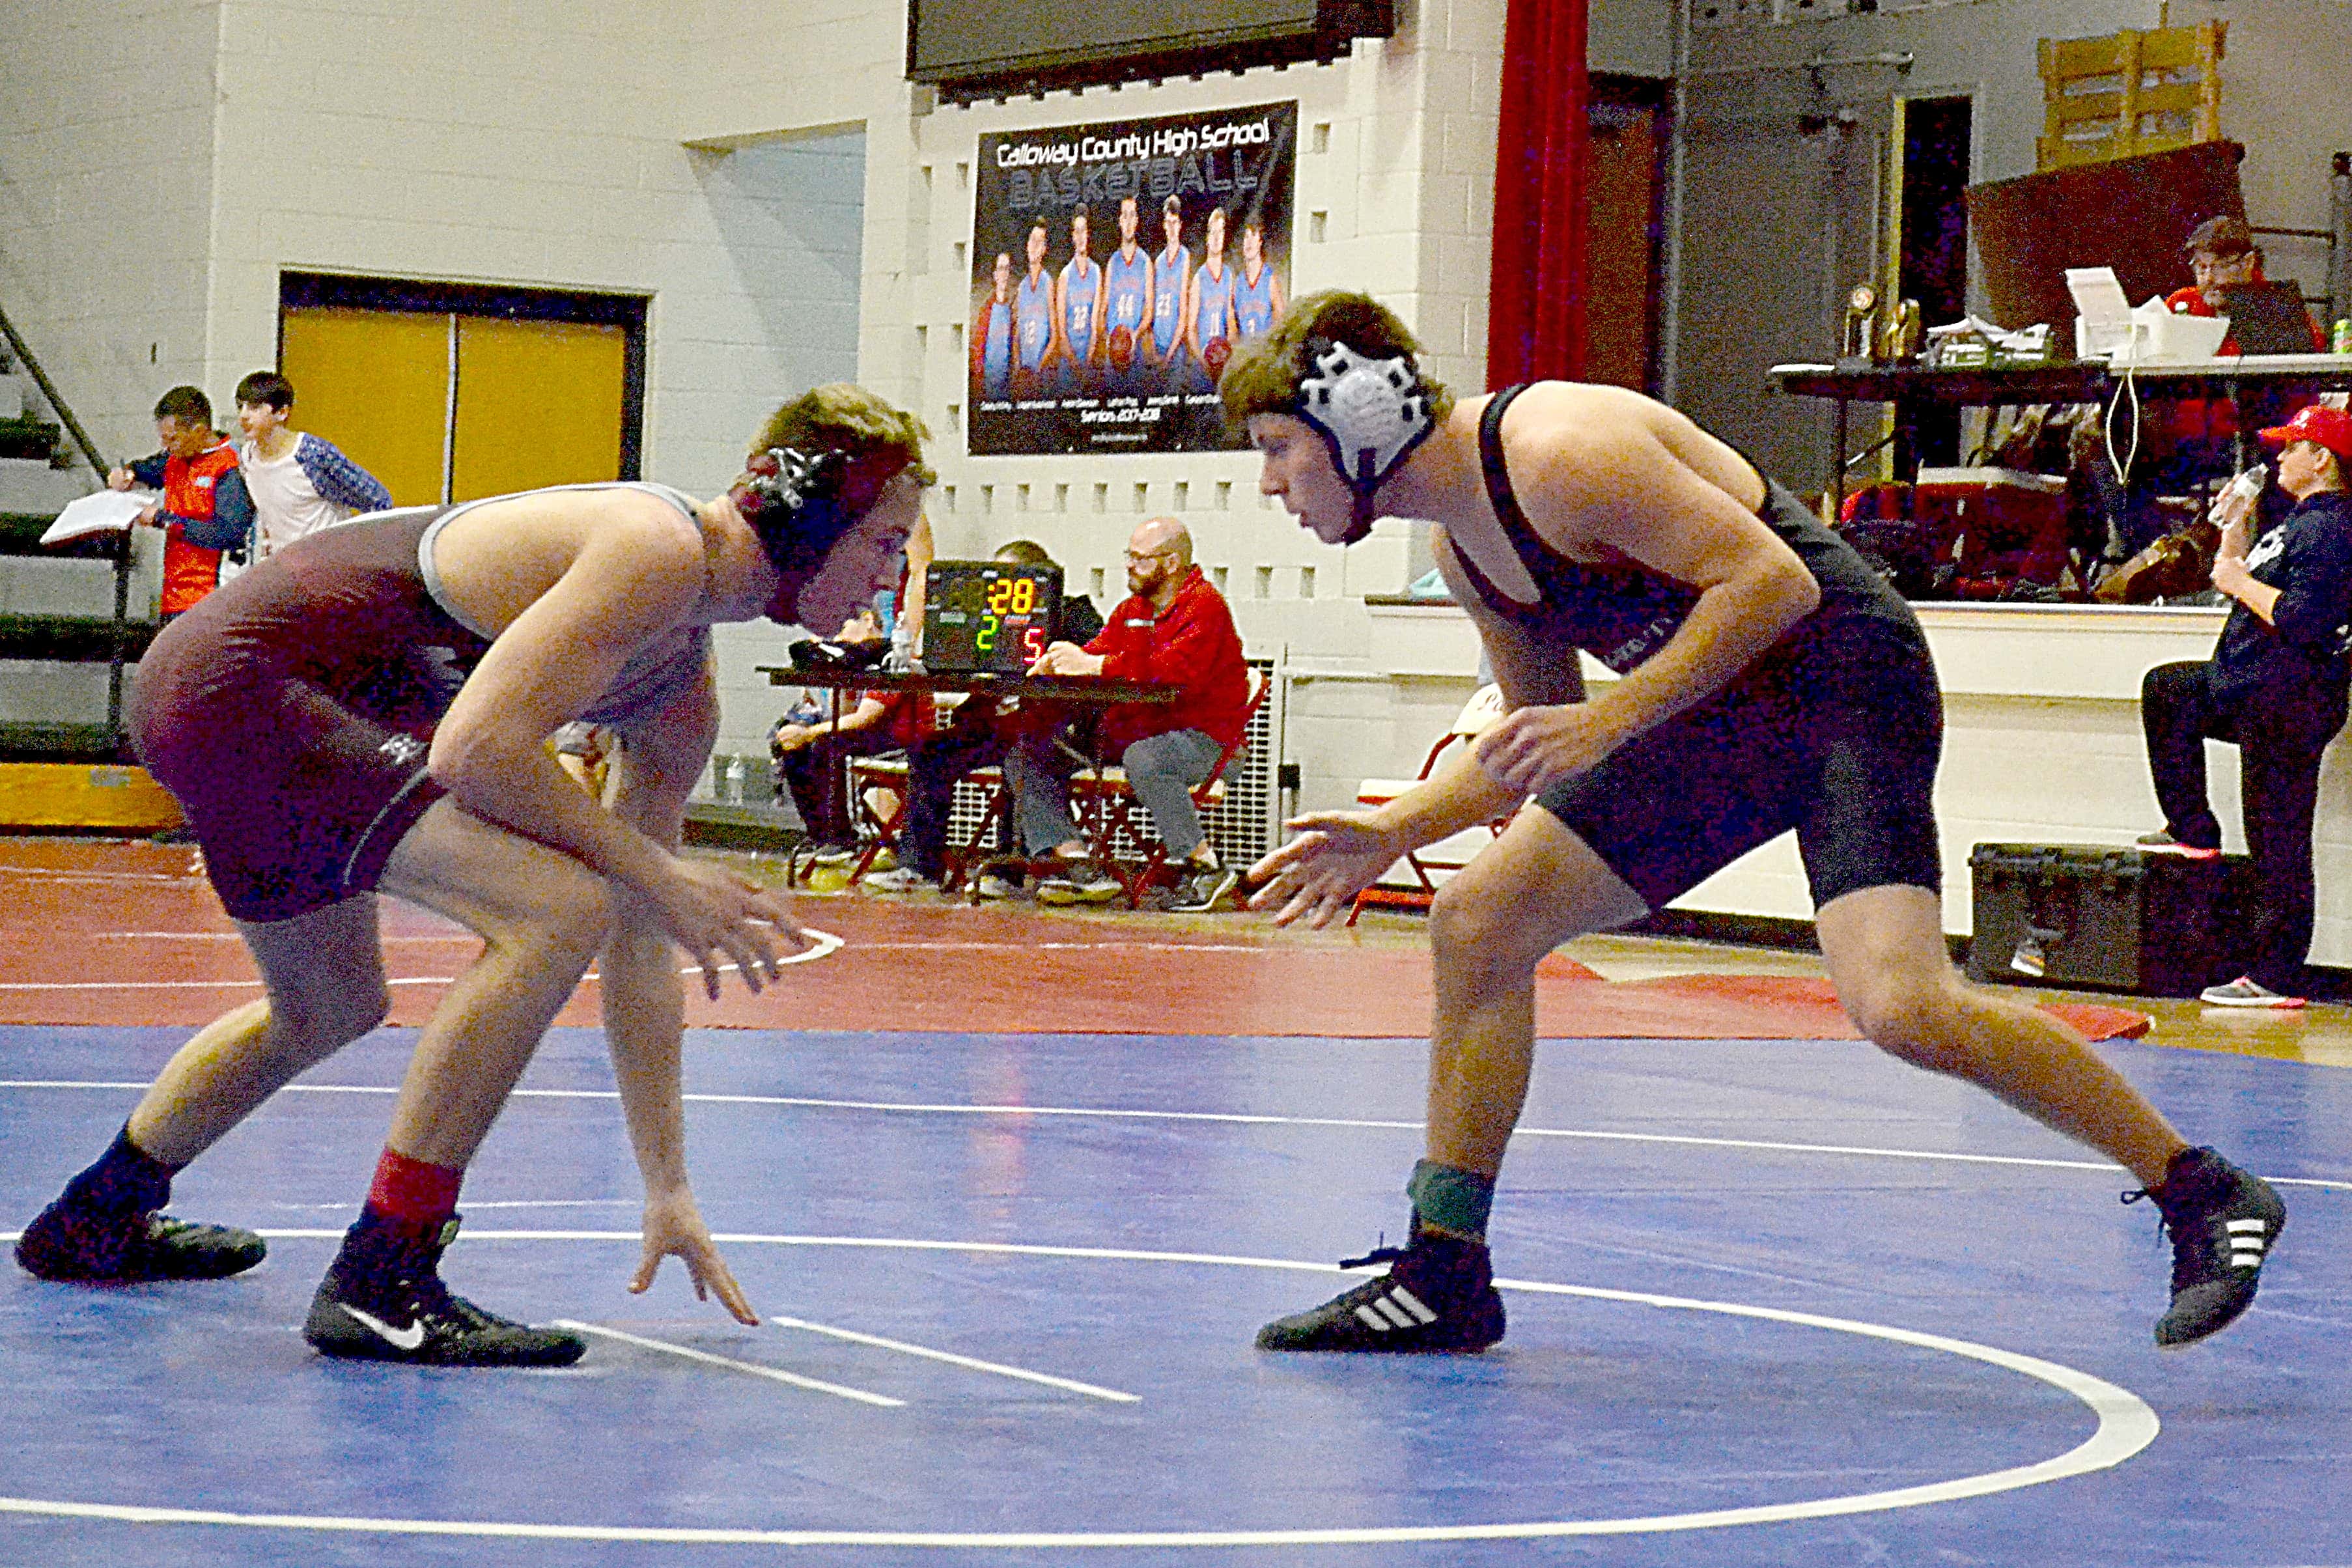 Trigg sophomore Alex Spears (right) faces off against McCracken County’s Hunter Vlach. Spears was 1-2 for the day at 145 lbs.: Trigg sophomore Alex Spears (right) faces off against McCracken County's Hunter Vlach. Spears was 1-2 for the day at 145 lbs.